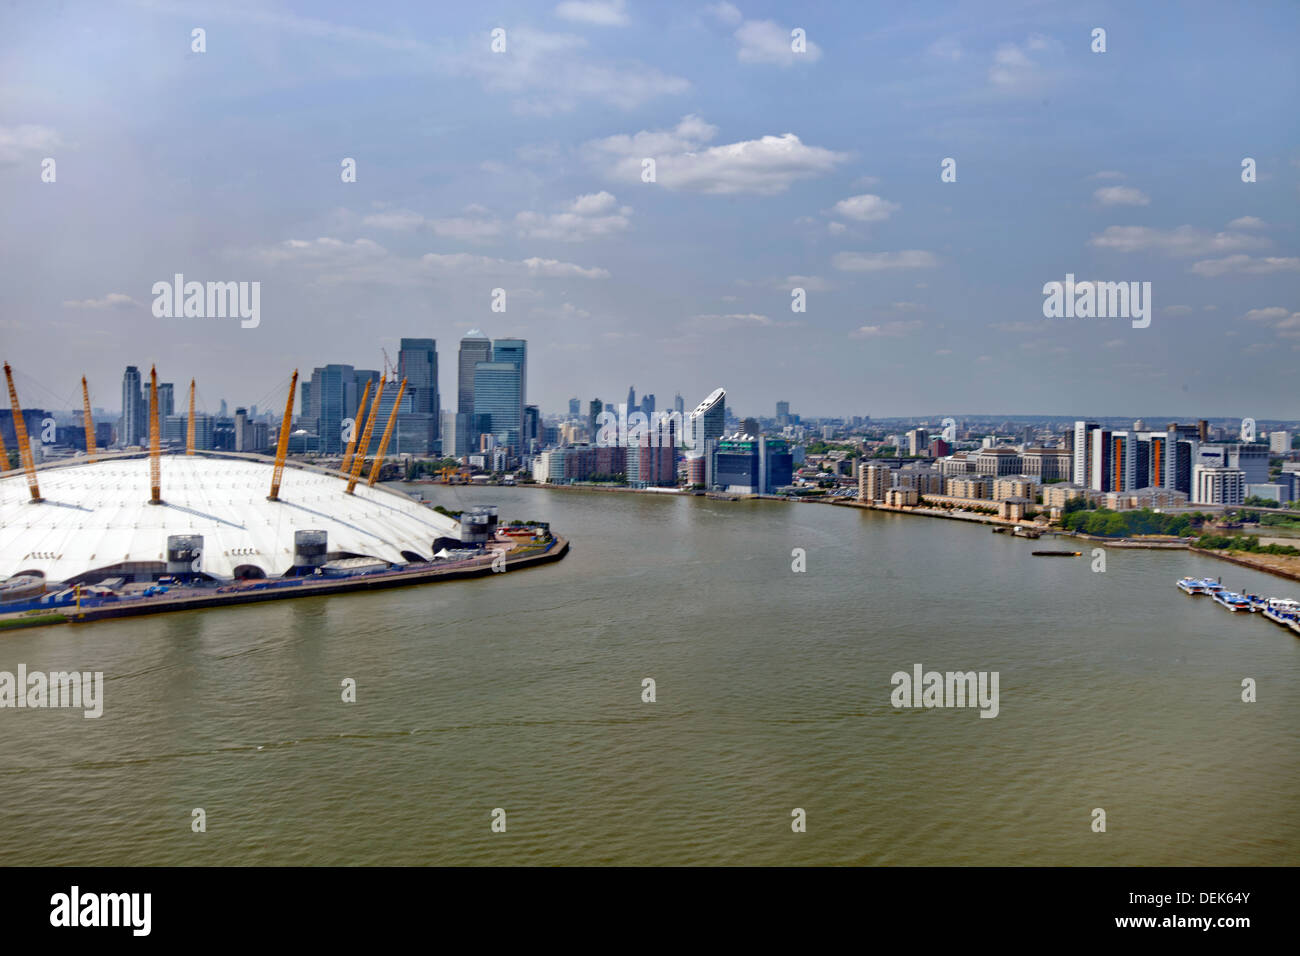 Royaume-uni, Angleterre, Londres, 02 Arena Canary Wharf Skyline Banque D'Images